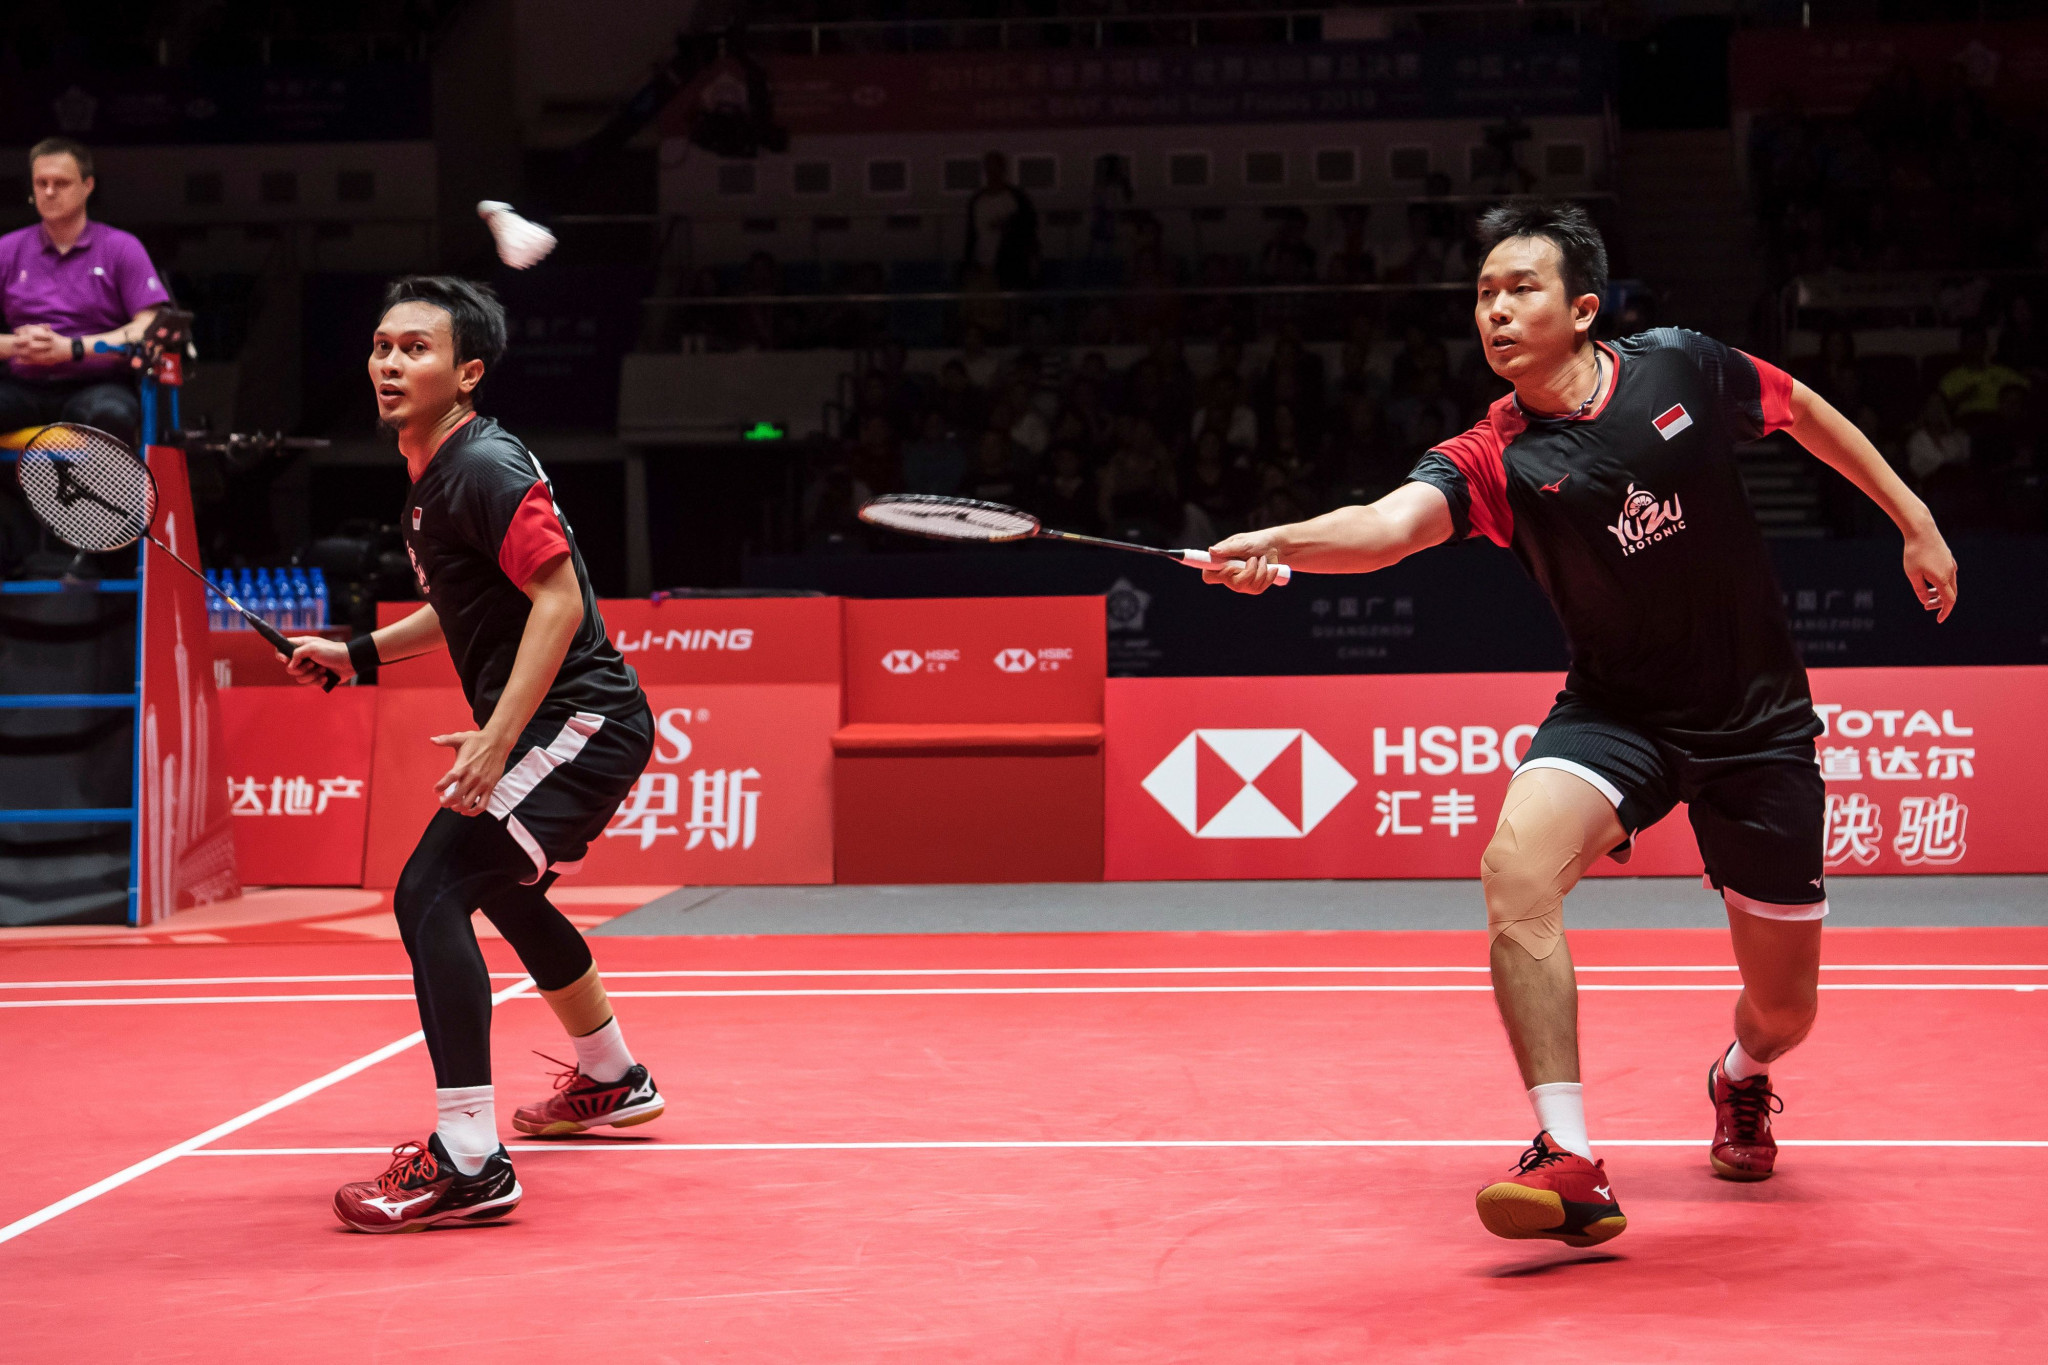 Indonesia's world champions Mohammad Ahsan and Hendra Setiawan went through in the men's doubles ©Getty Images